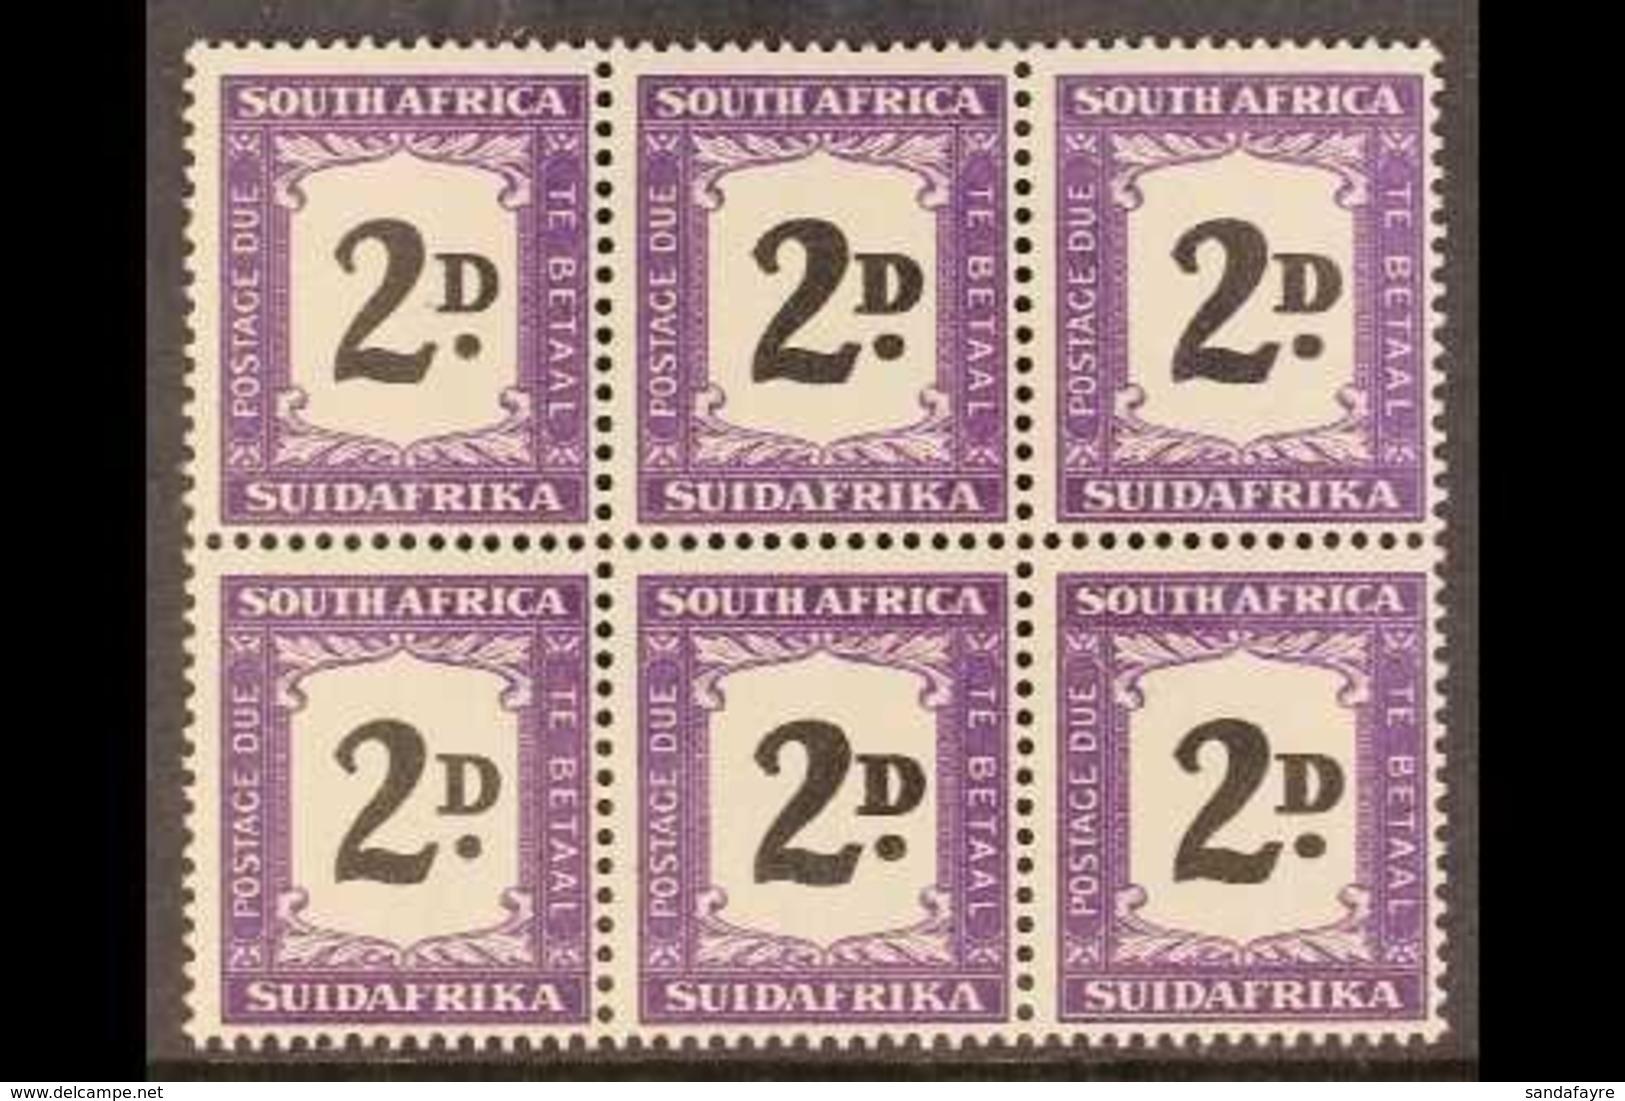 1948-49 POSTAGE DUE 2d Black And Violet, Block Of Six, Showing Thick (double) "D" In Four Positions (R15 5-6, R16 5-6),  - Unclassified